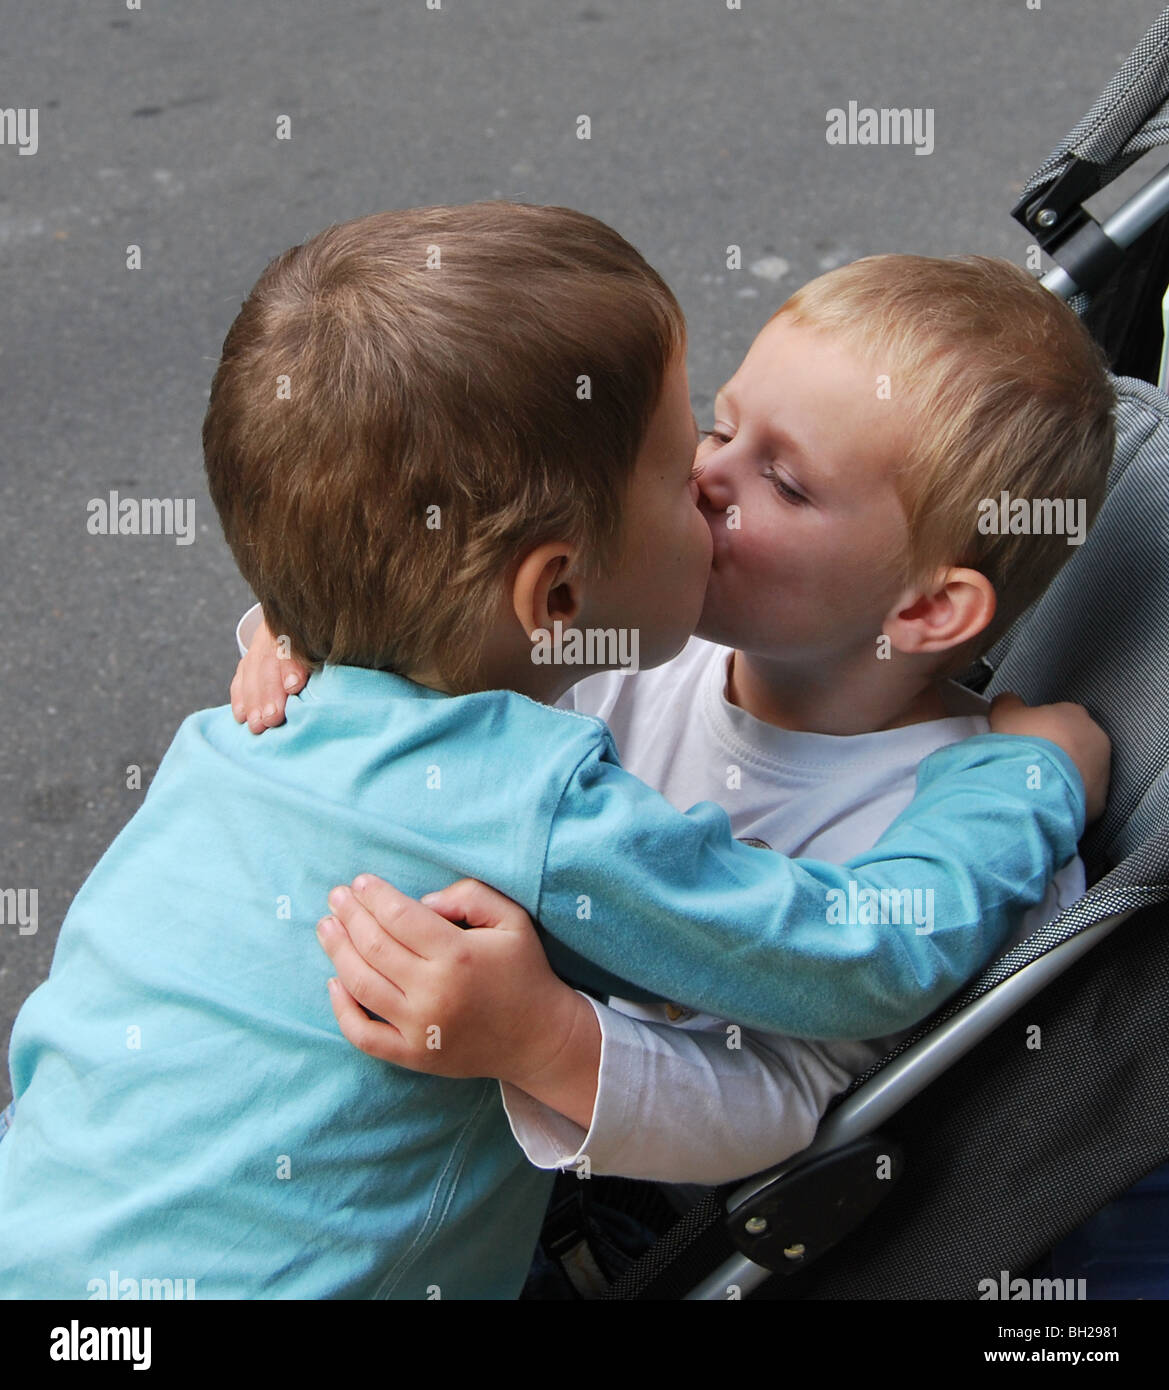 Brotherly love, 2 brothers sharing a kiss Stock Photo - Alamy